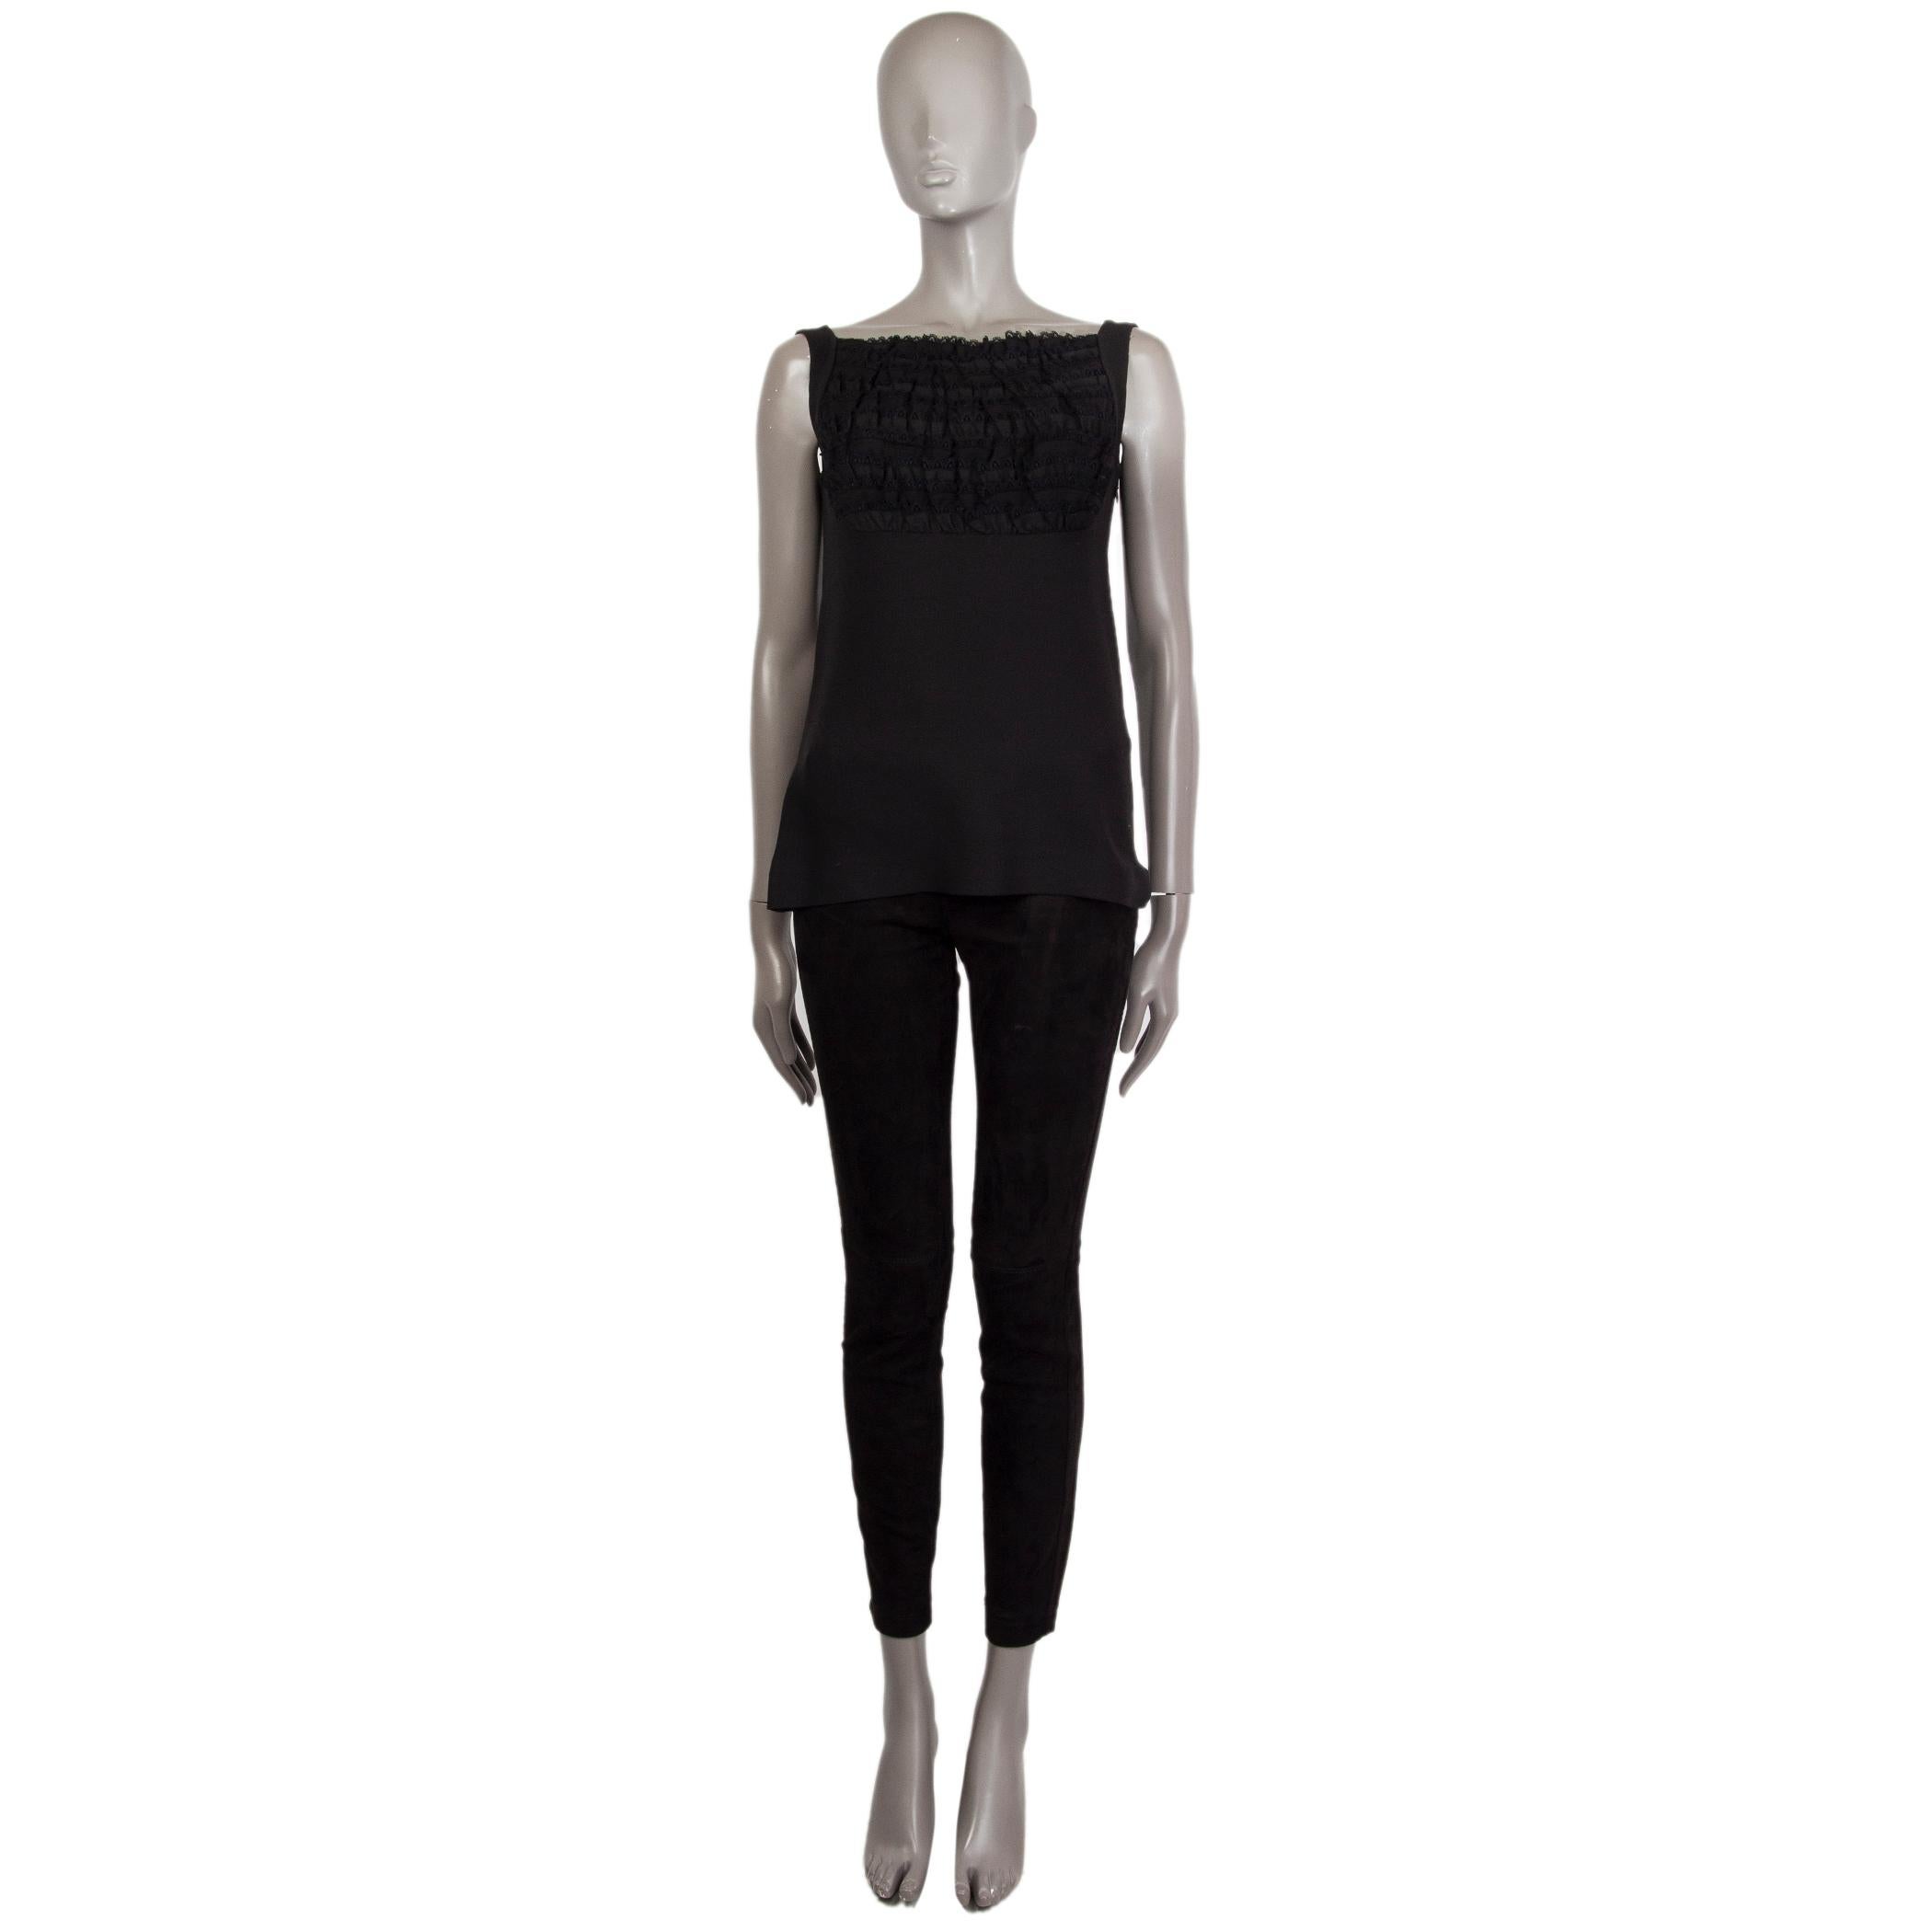 100% authentic Prada ruched-panel sleeveless top in black silk (100%). With square neck. Closes on the side with hock and invisable zipper. Unlined. Has been worn and is in excellent condition. 

Measurements
Tag Size	38
Size	XS
Shoulder Width	35cm